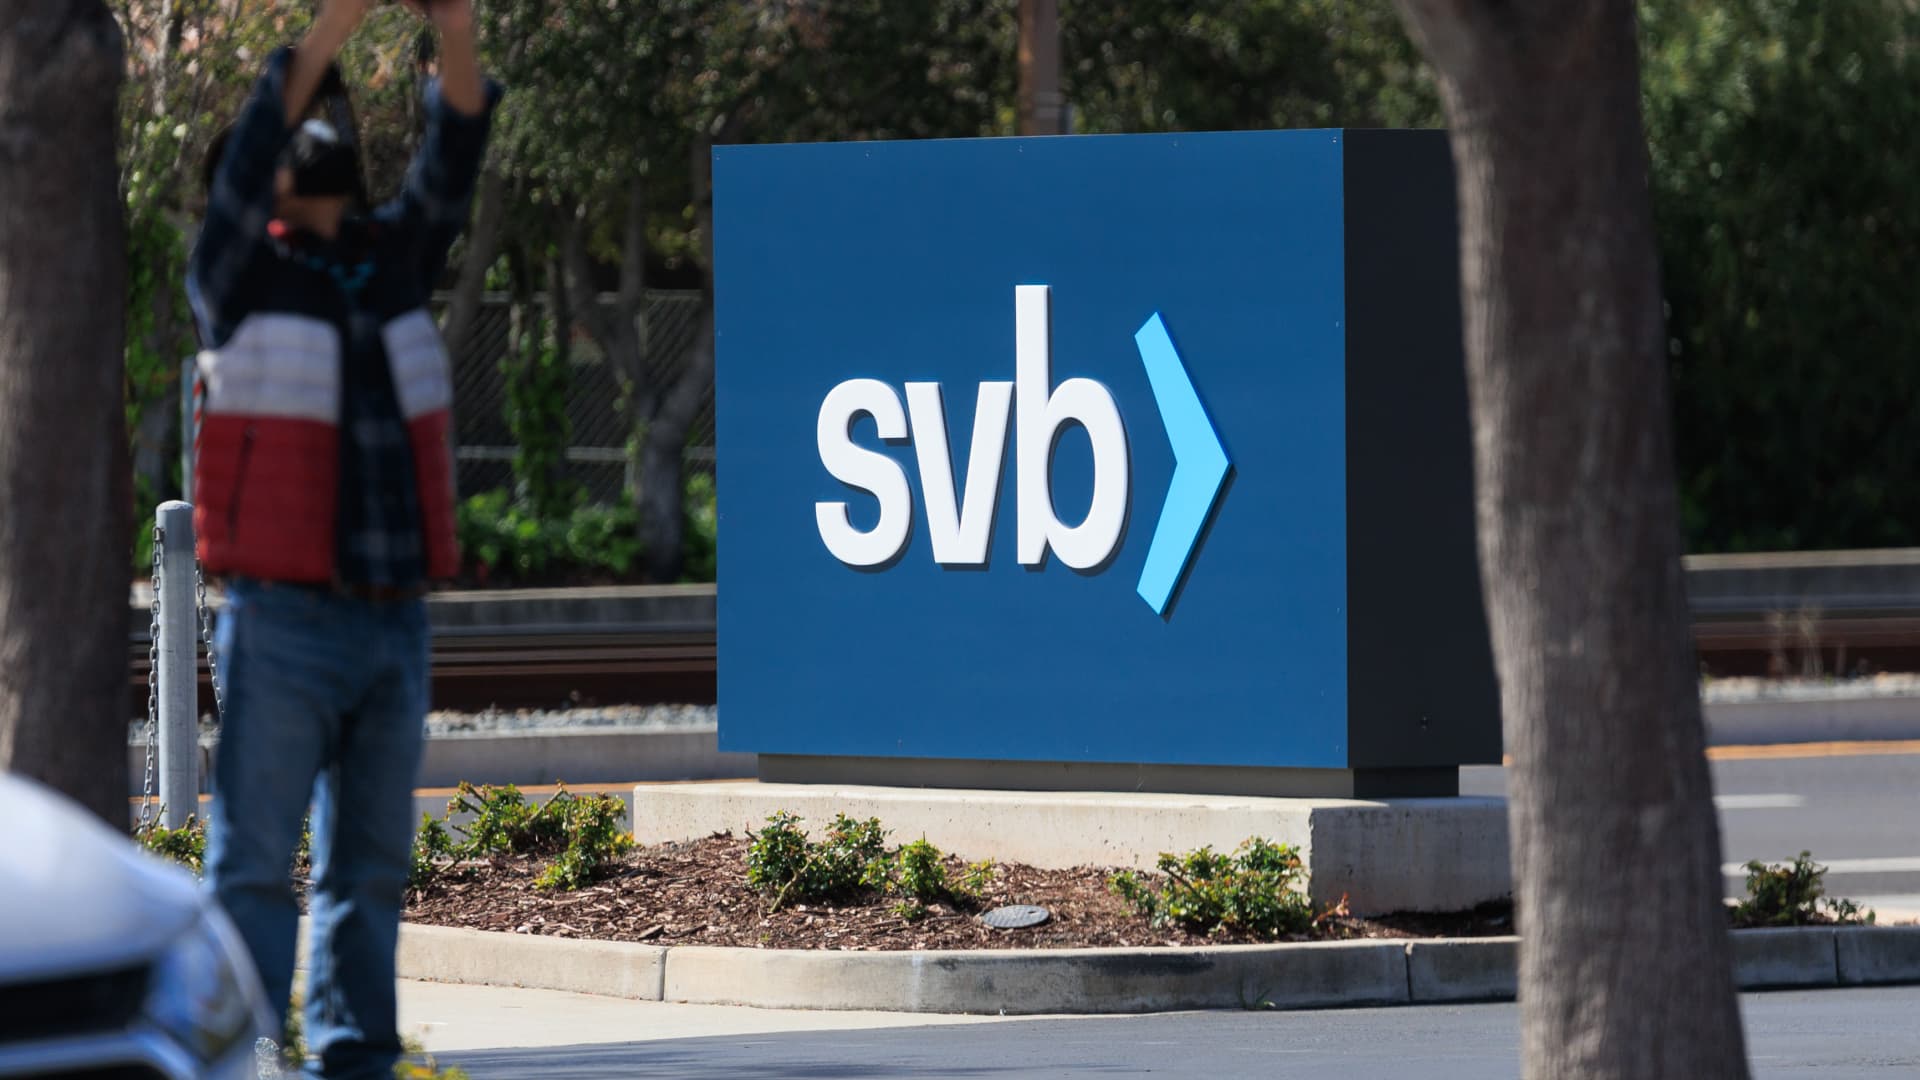 Southeast Asia VC firms more impacted from SVB fallout than startups